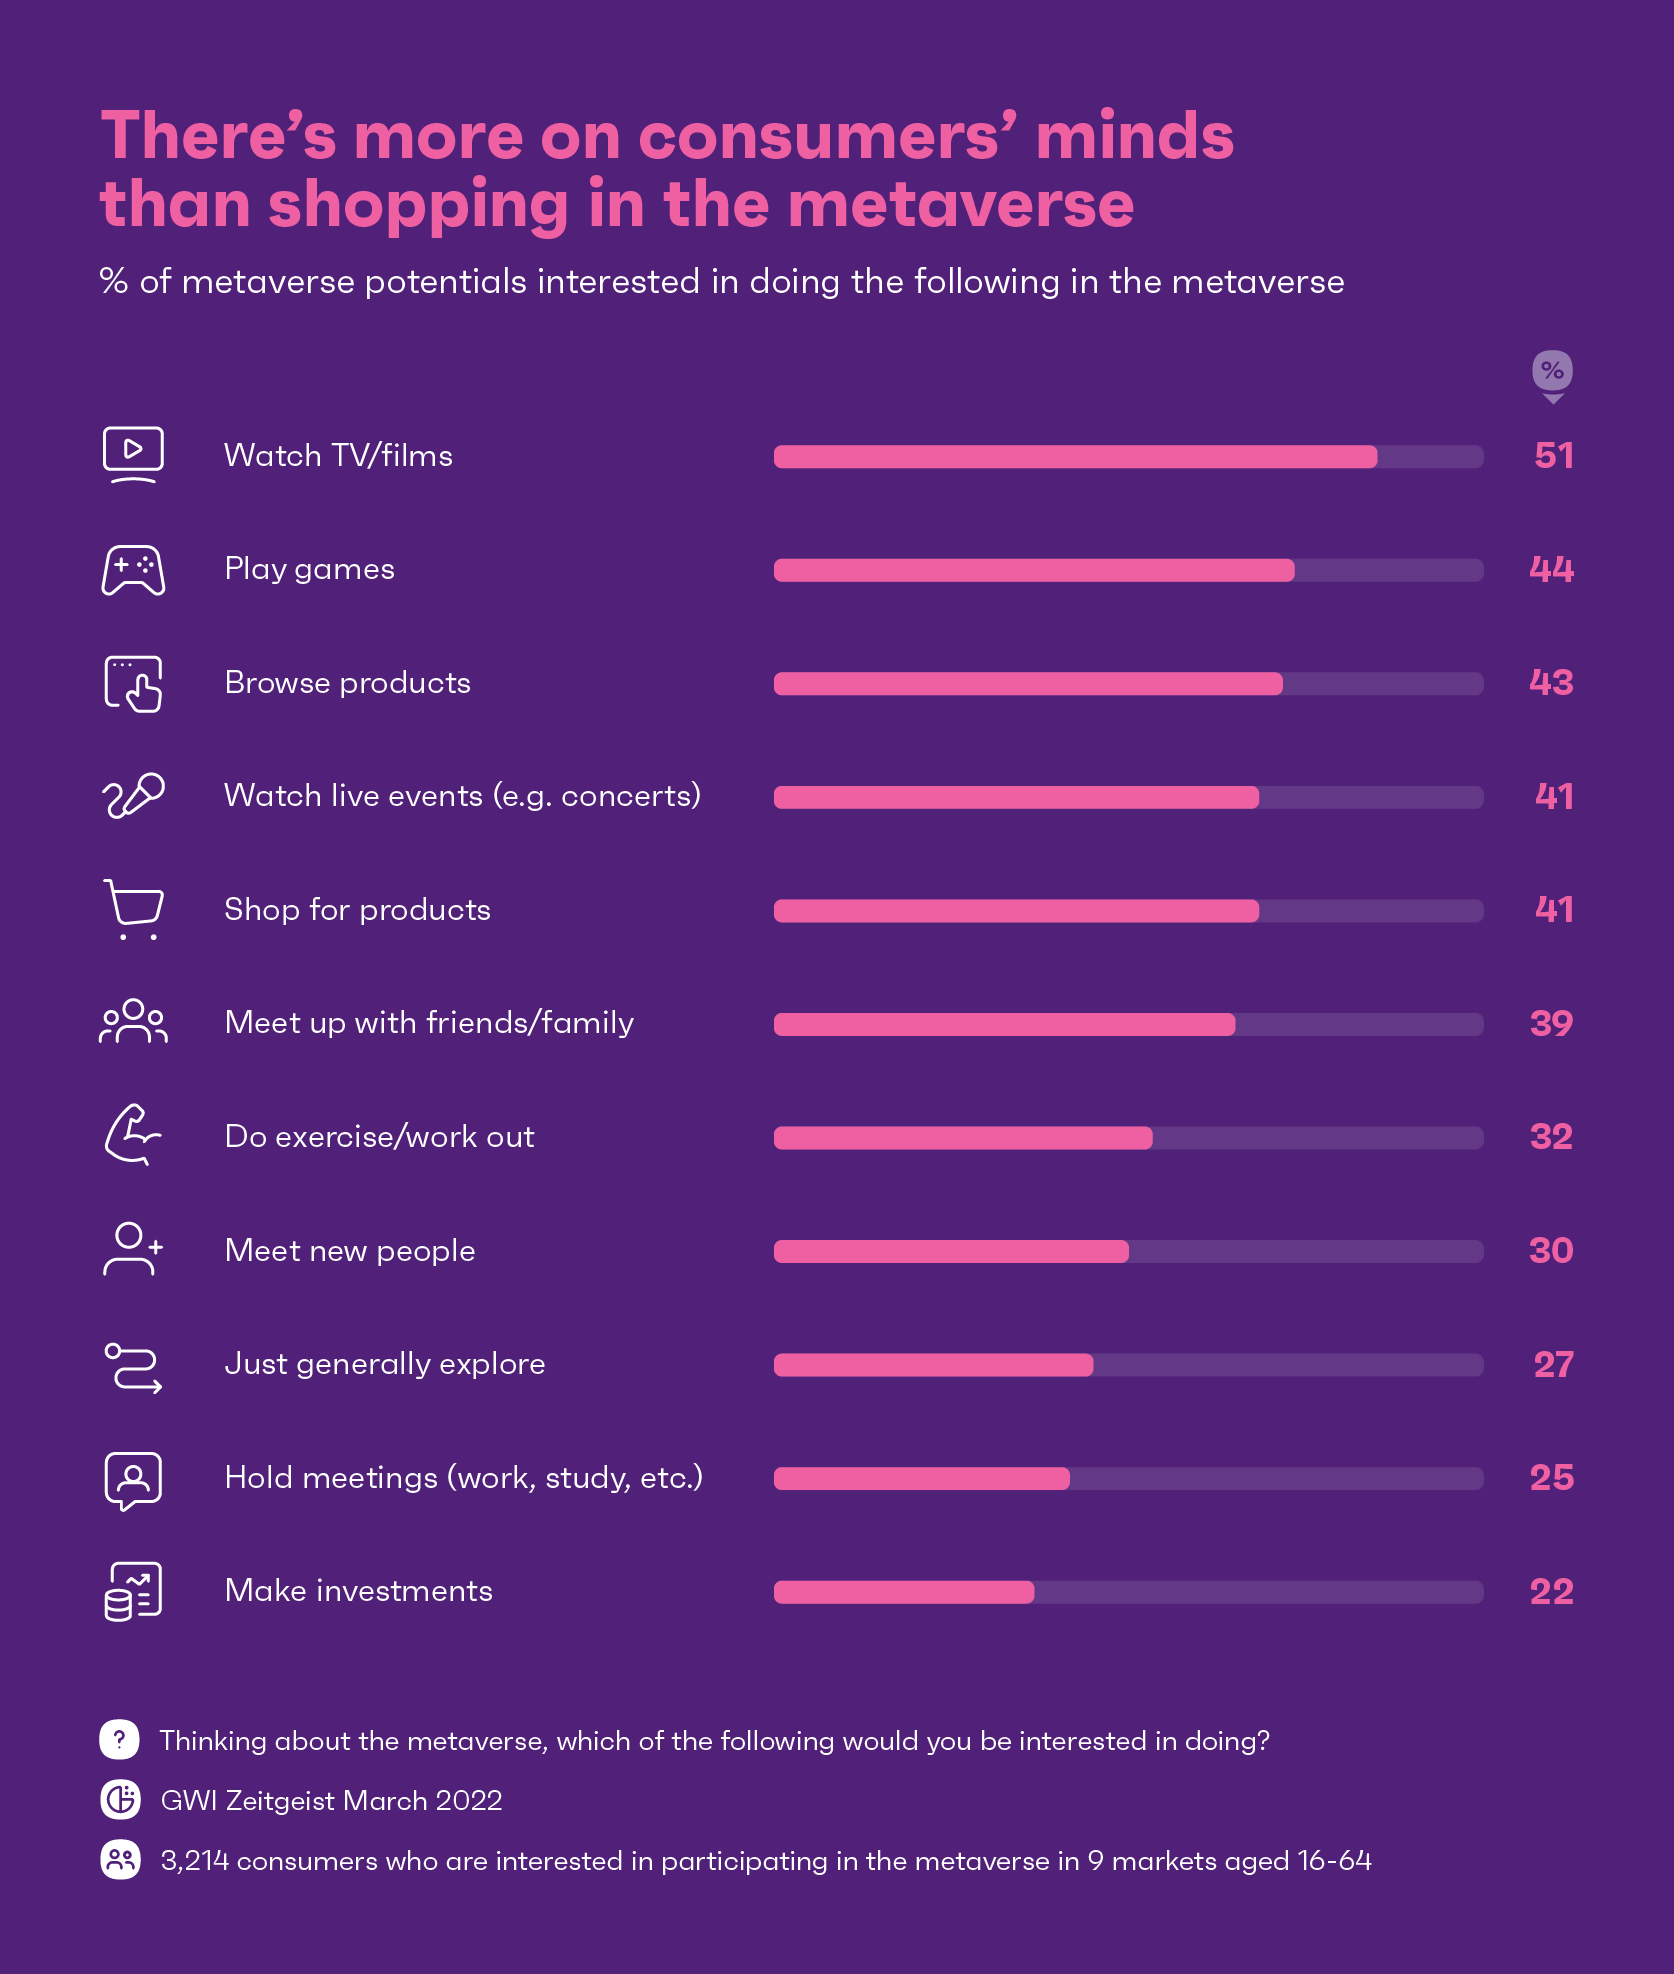 Chart showing activities that consumers want to partake in the metaverse